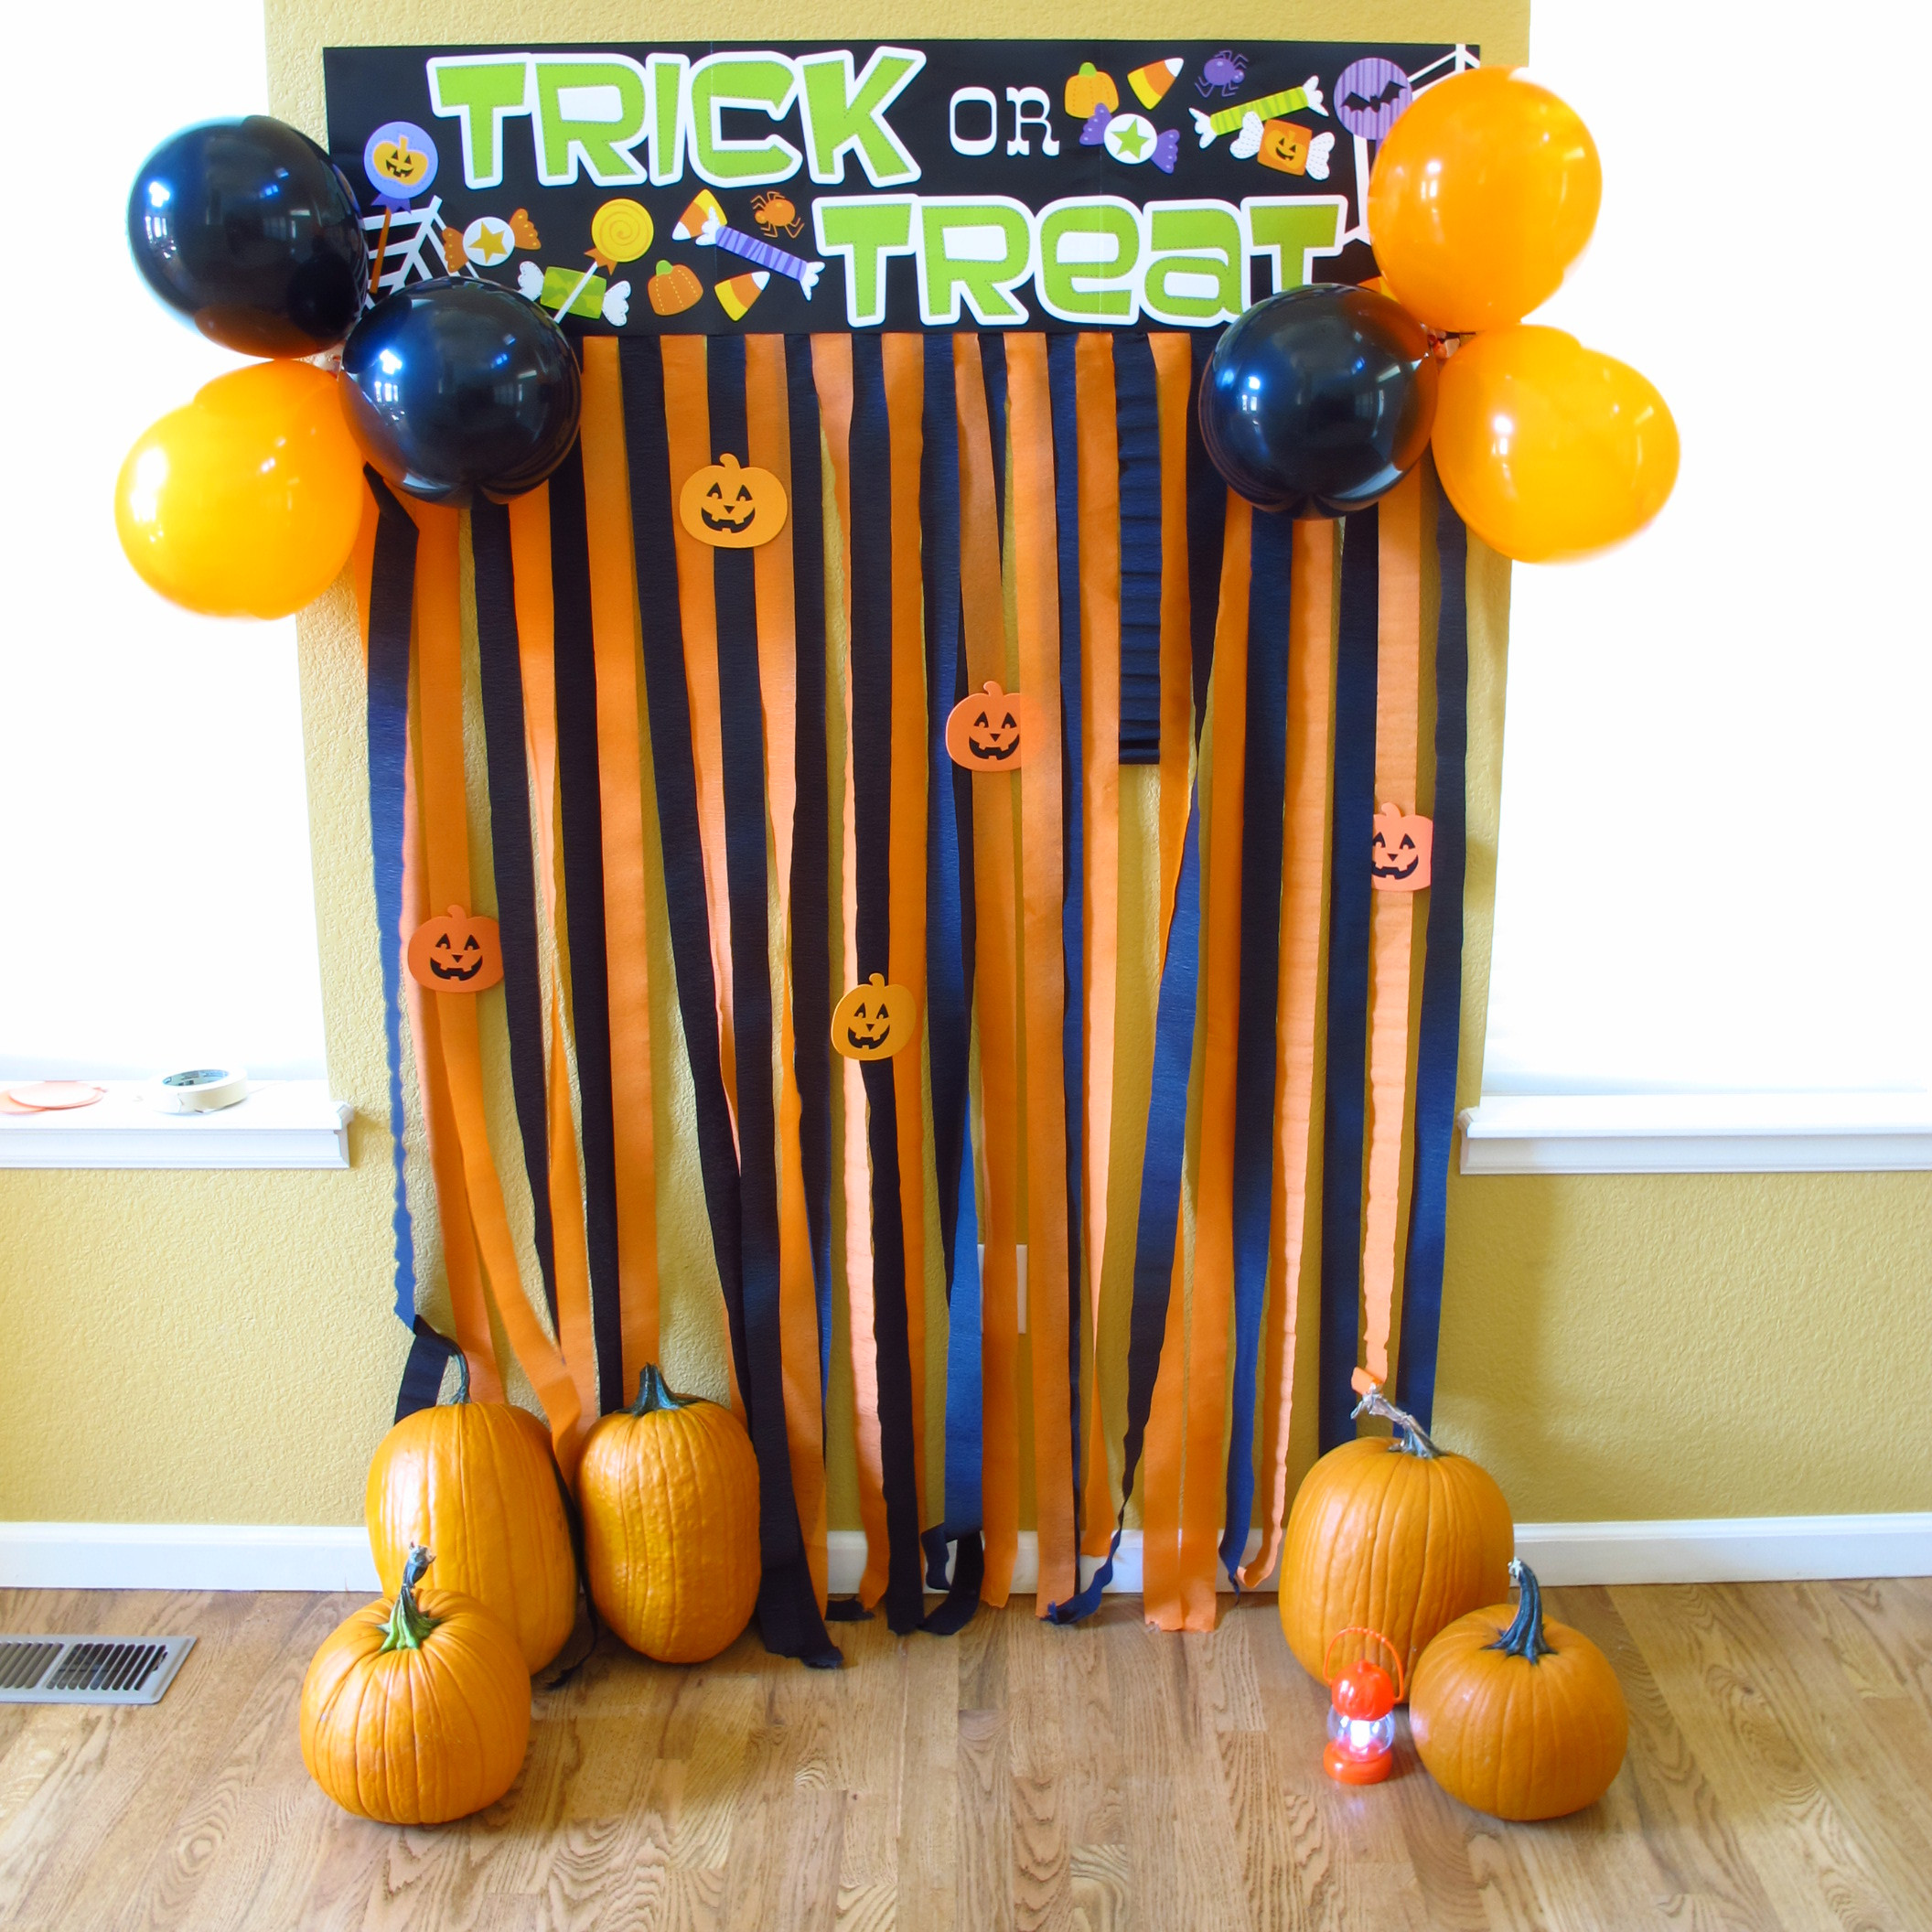 Halloween Party Photo Booth Ideas
 Capture memories with a kid s spooky booth